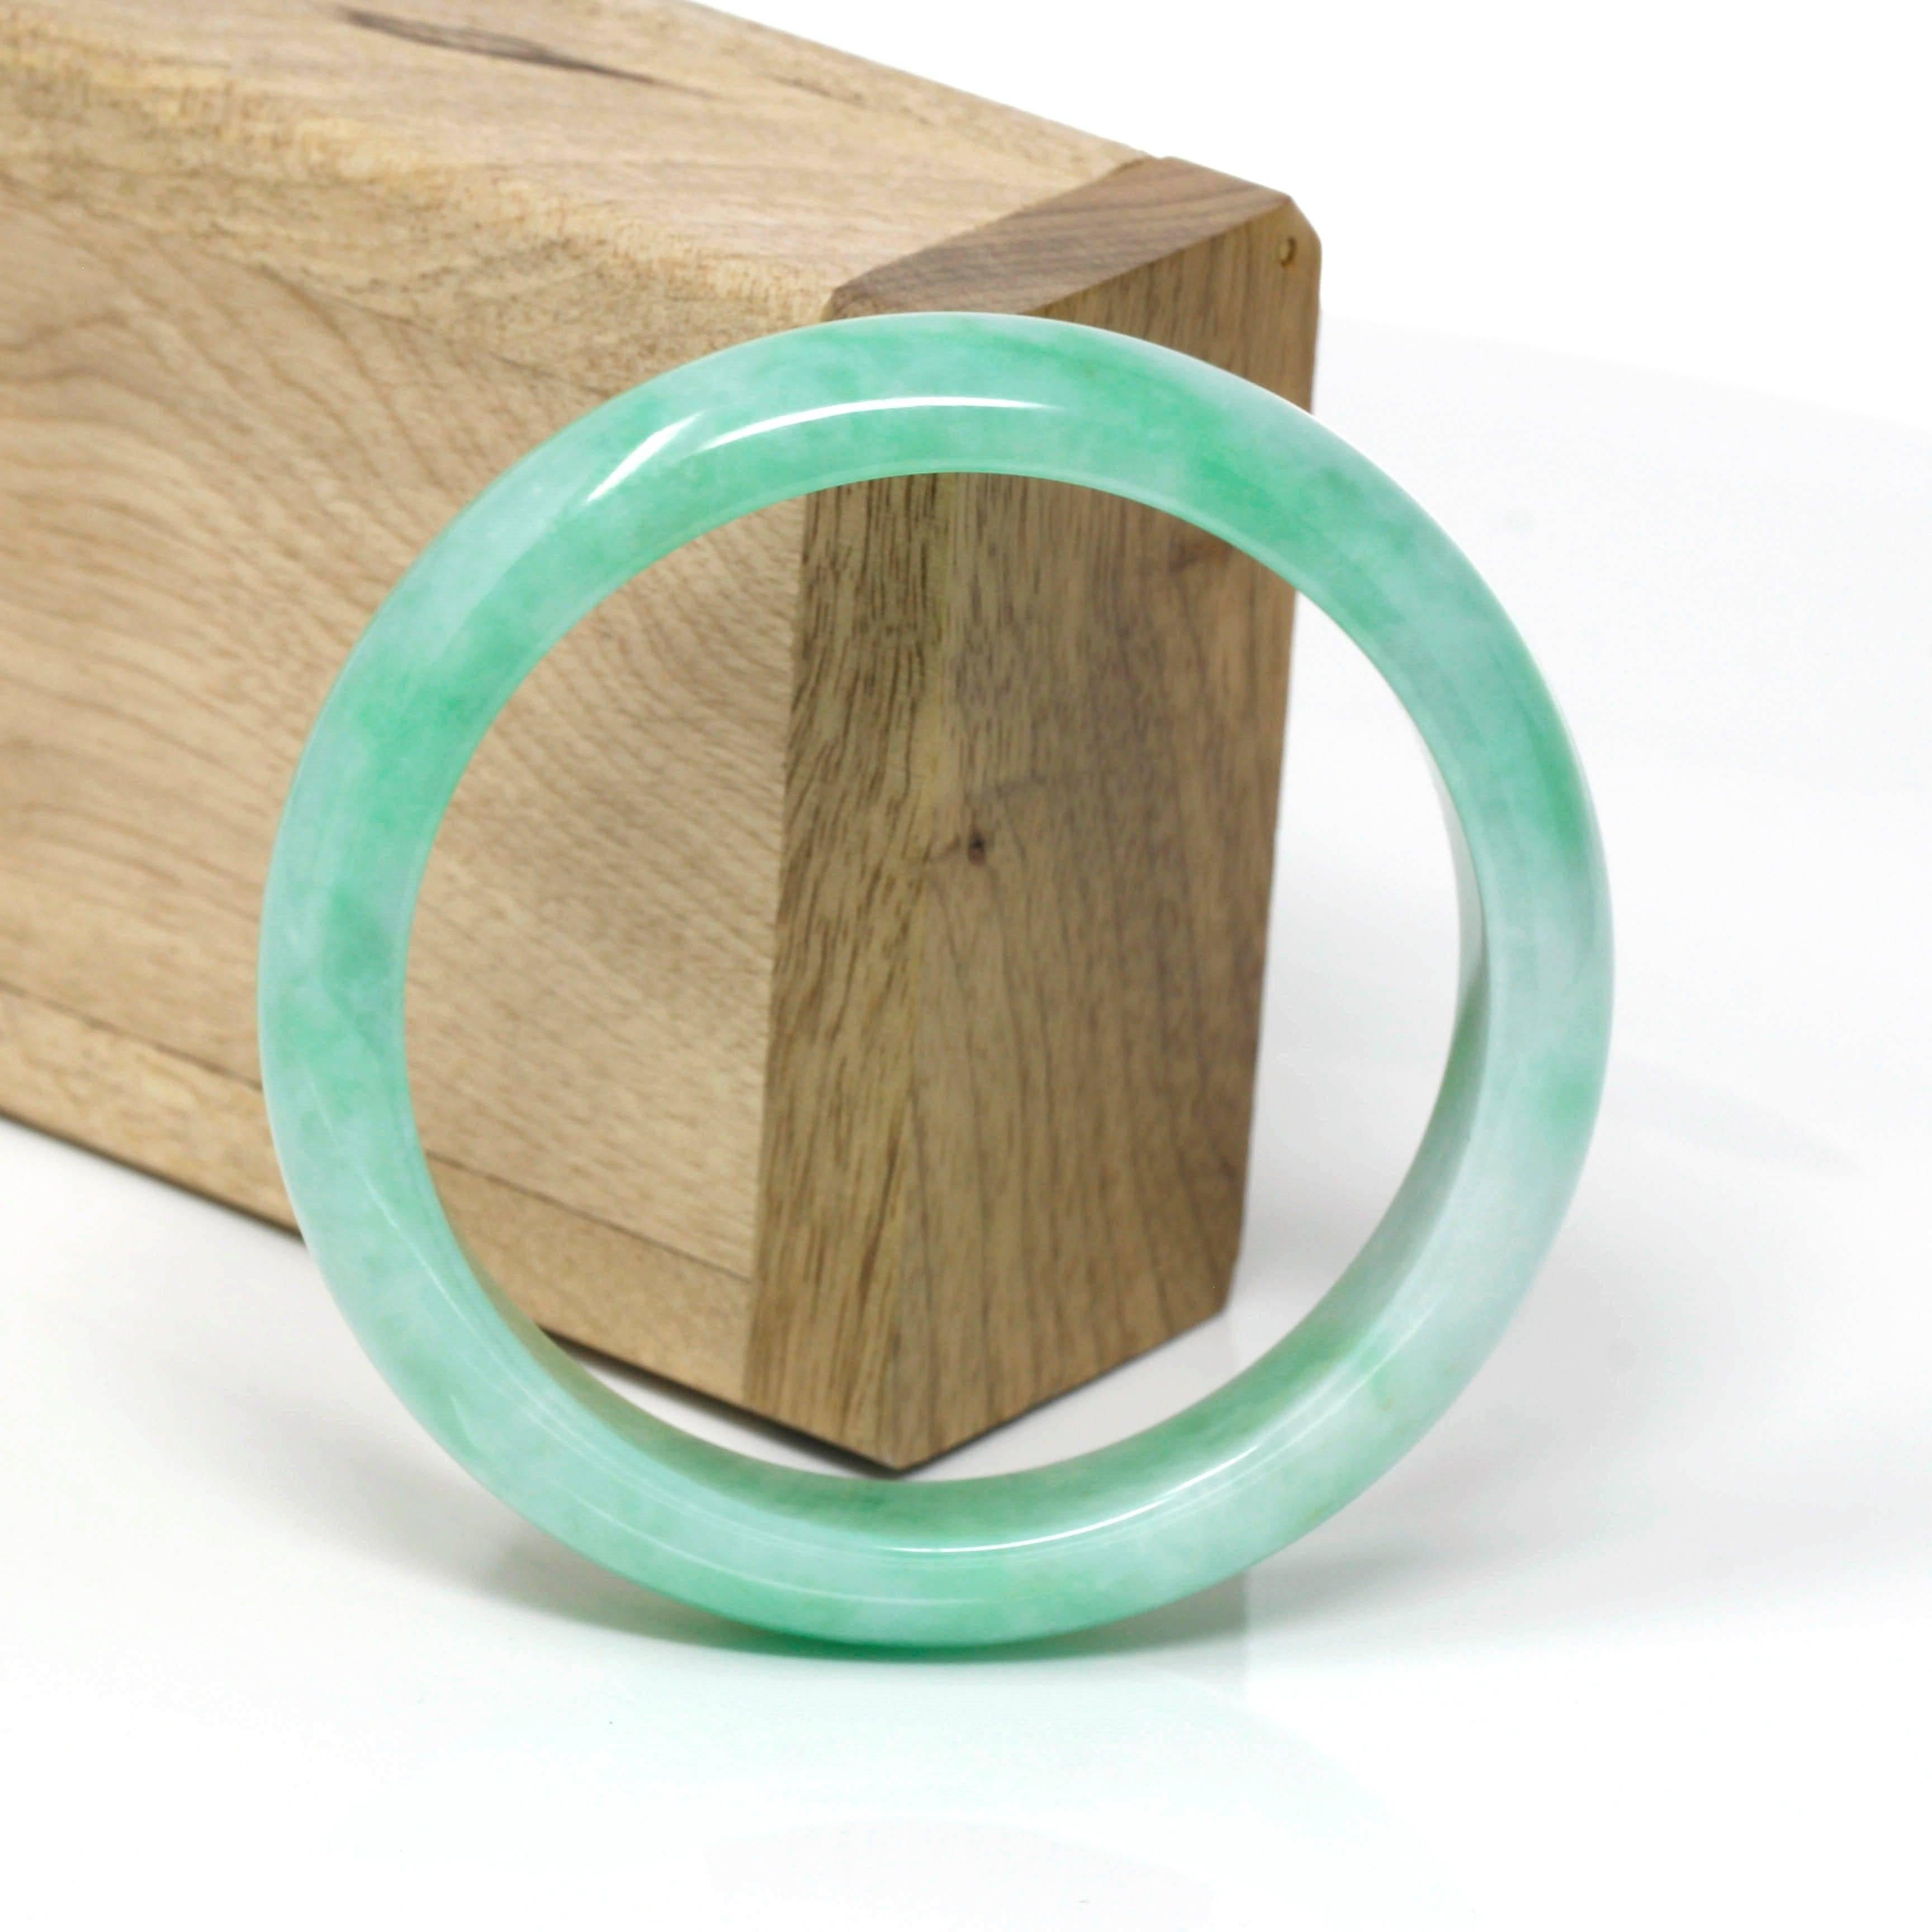  * DETAILS--- Genuine Burmese Jadeite Jade Bangle Bracelet. This bangle is made with high-quality genuine Burmese Vibrant Green Jadeite jade, The jade texture is so translucent with apple green color inside. The apple green color and translucent